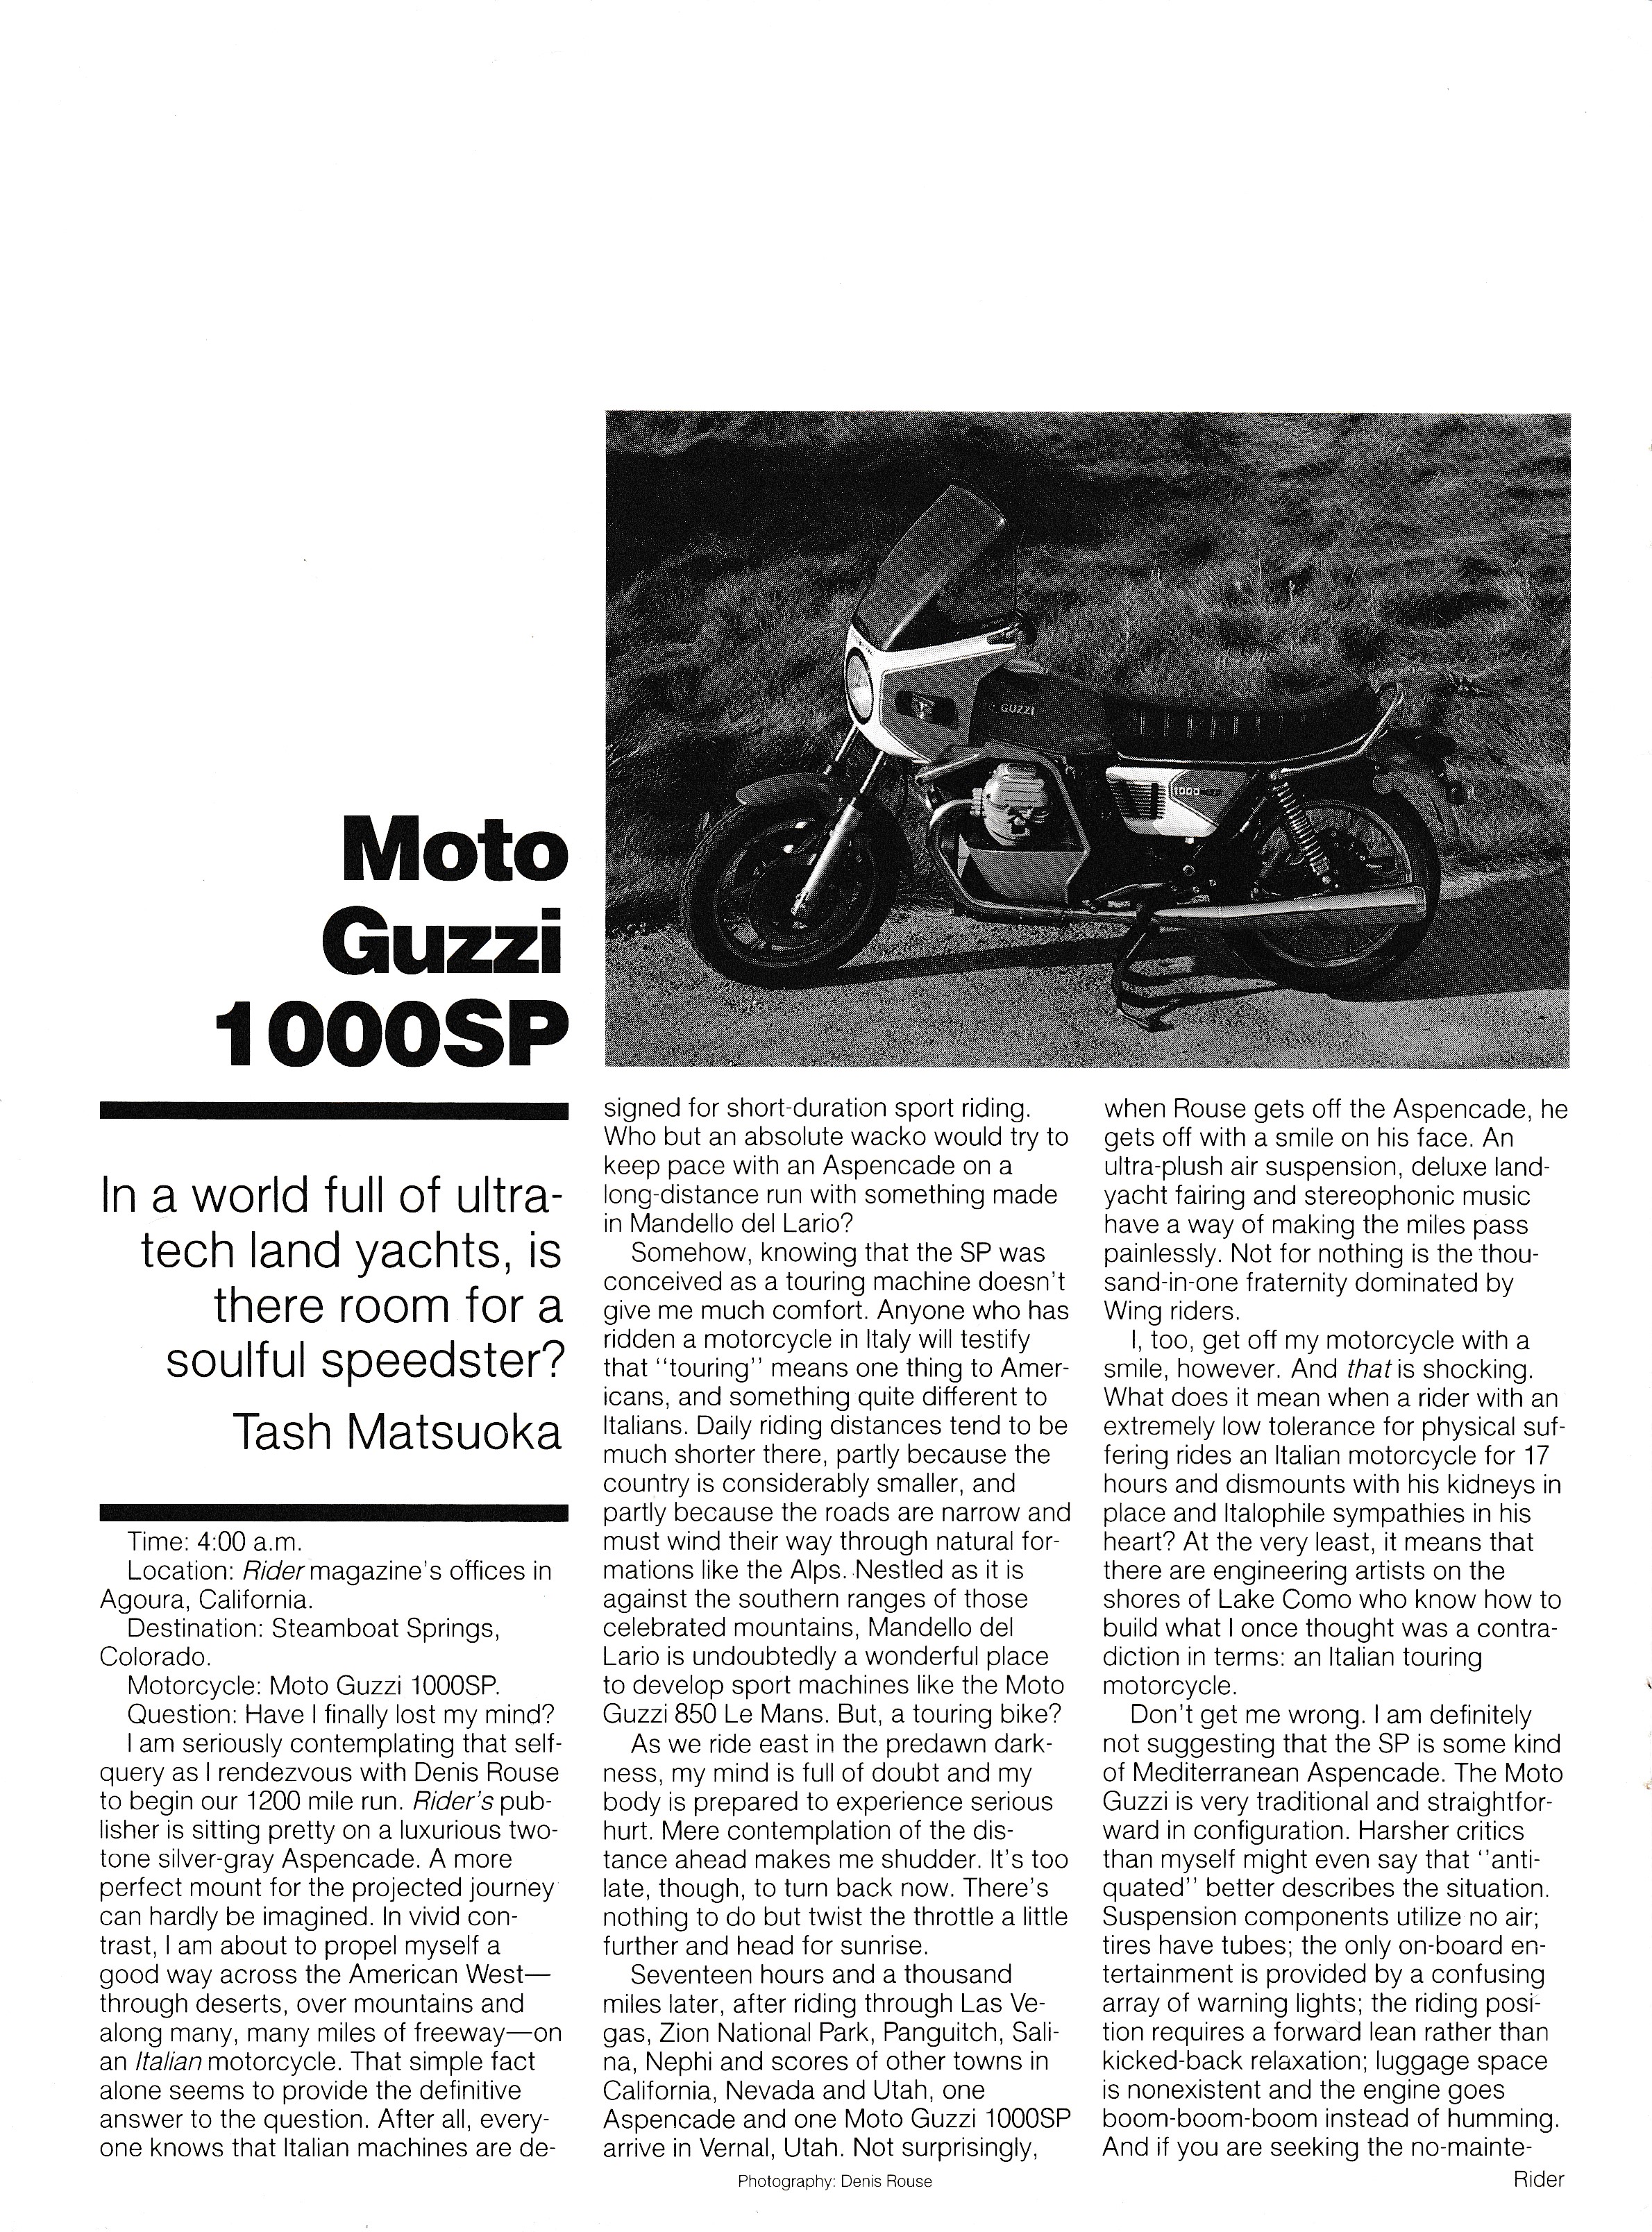 Article - Rider (1983 December) First test: Moto Guzzi 1000 SP bring on the curves